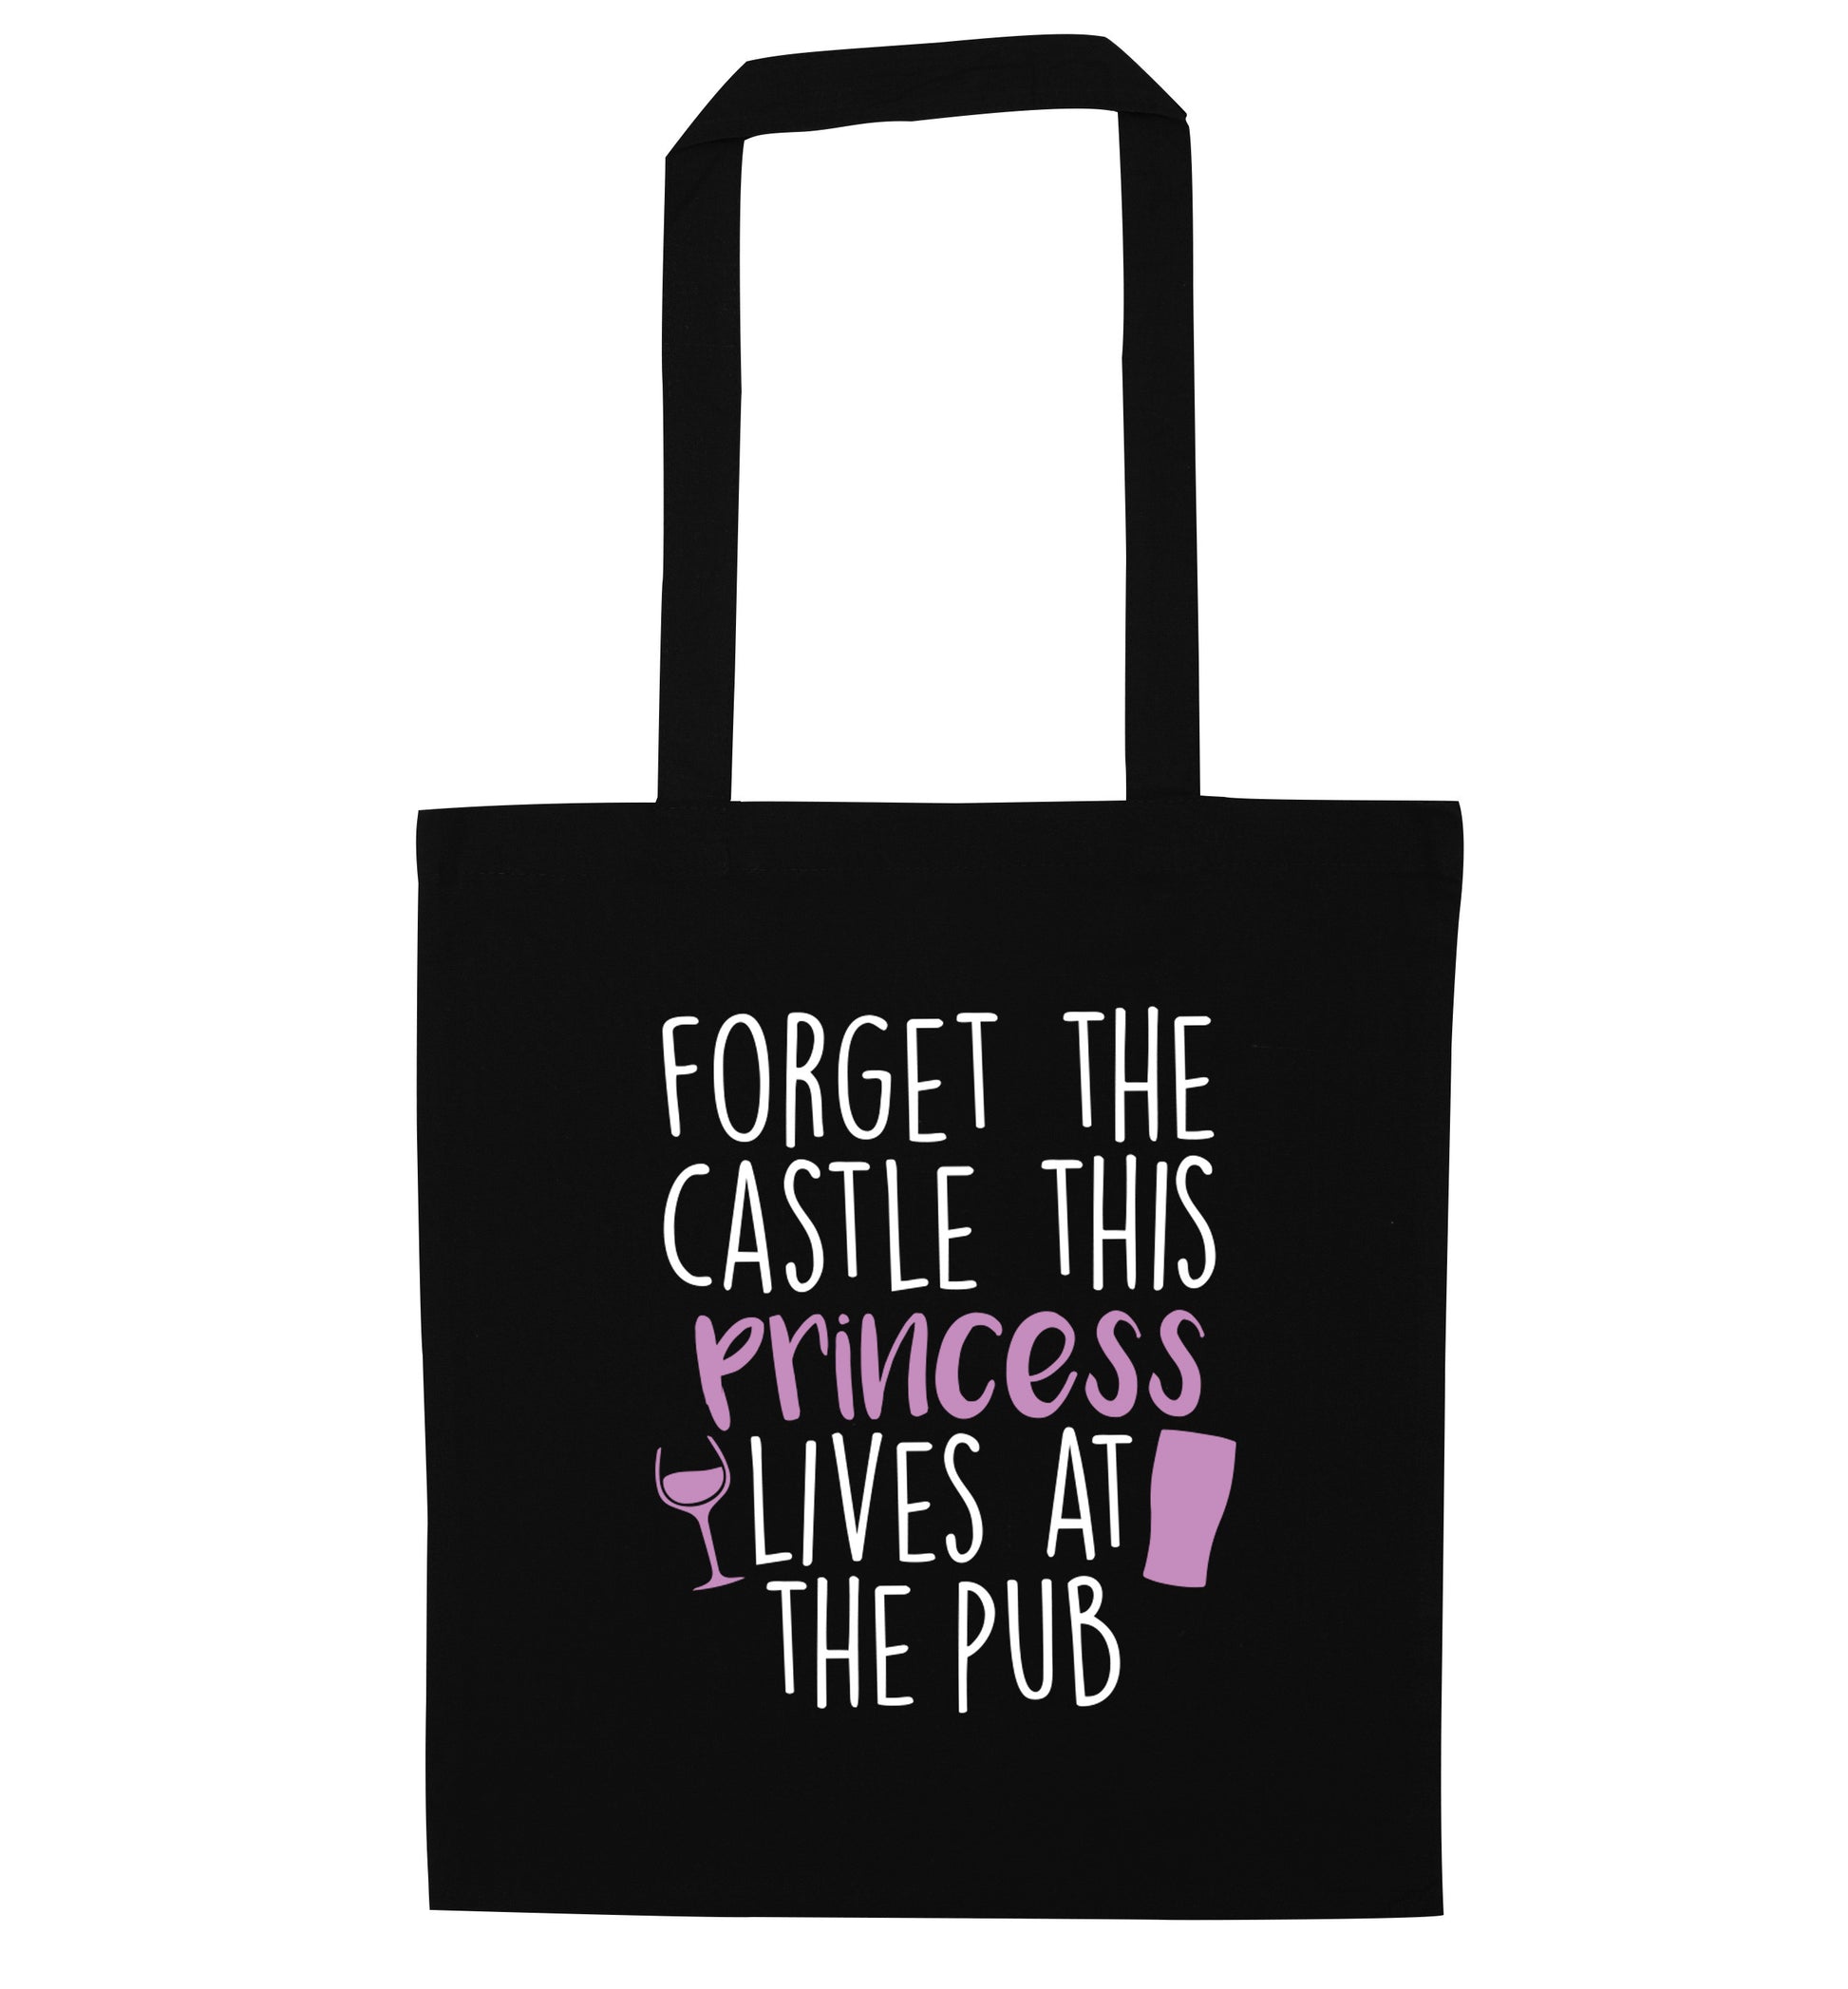 Forget the castle this princess lives at the pub black tote bag